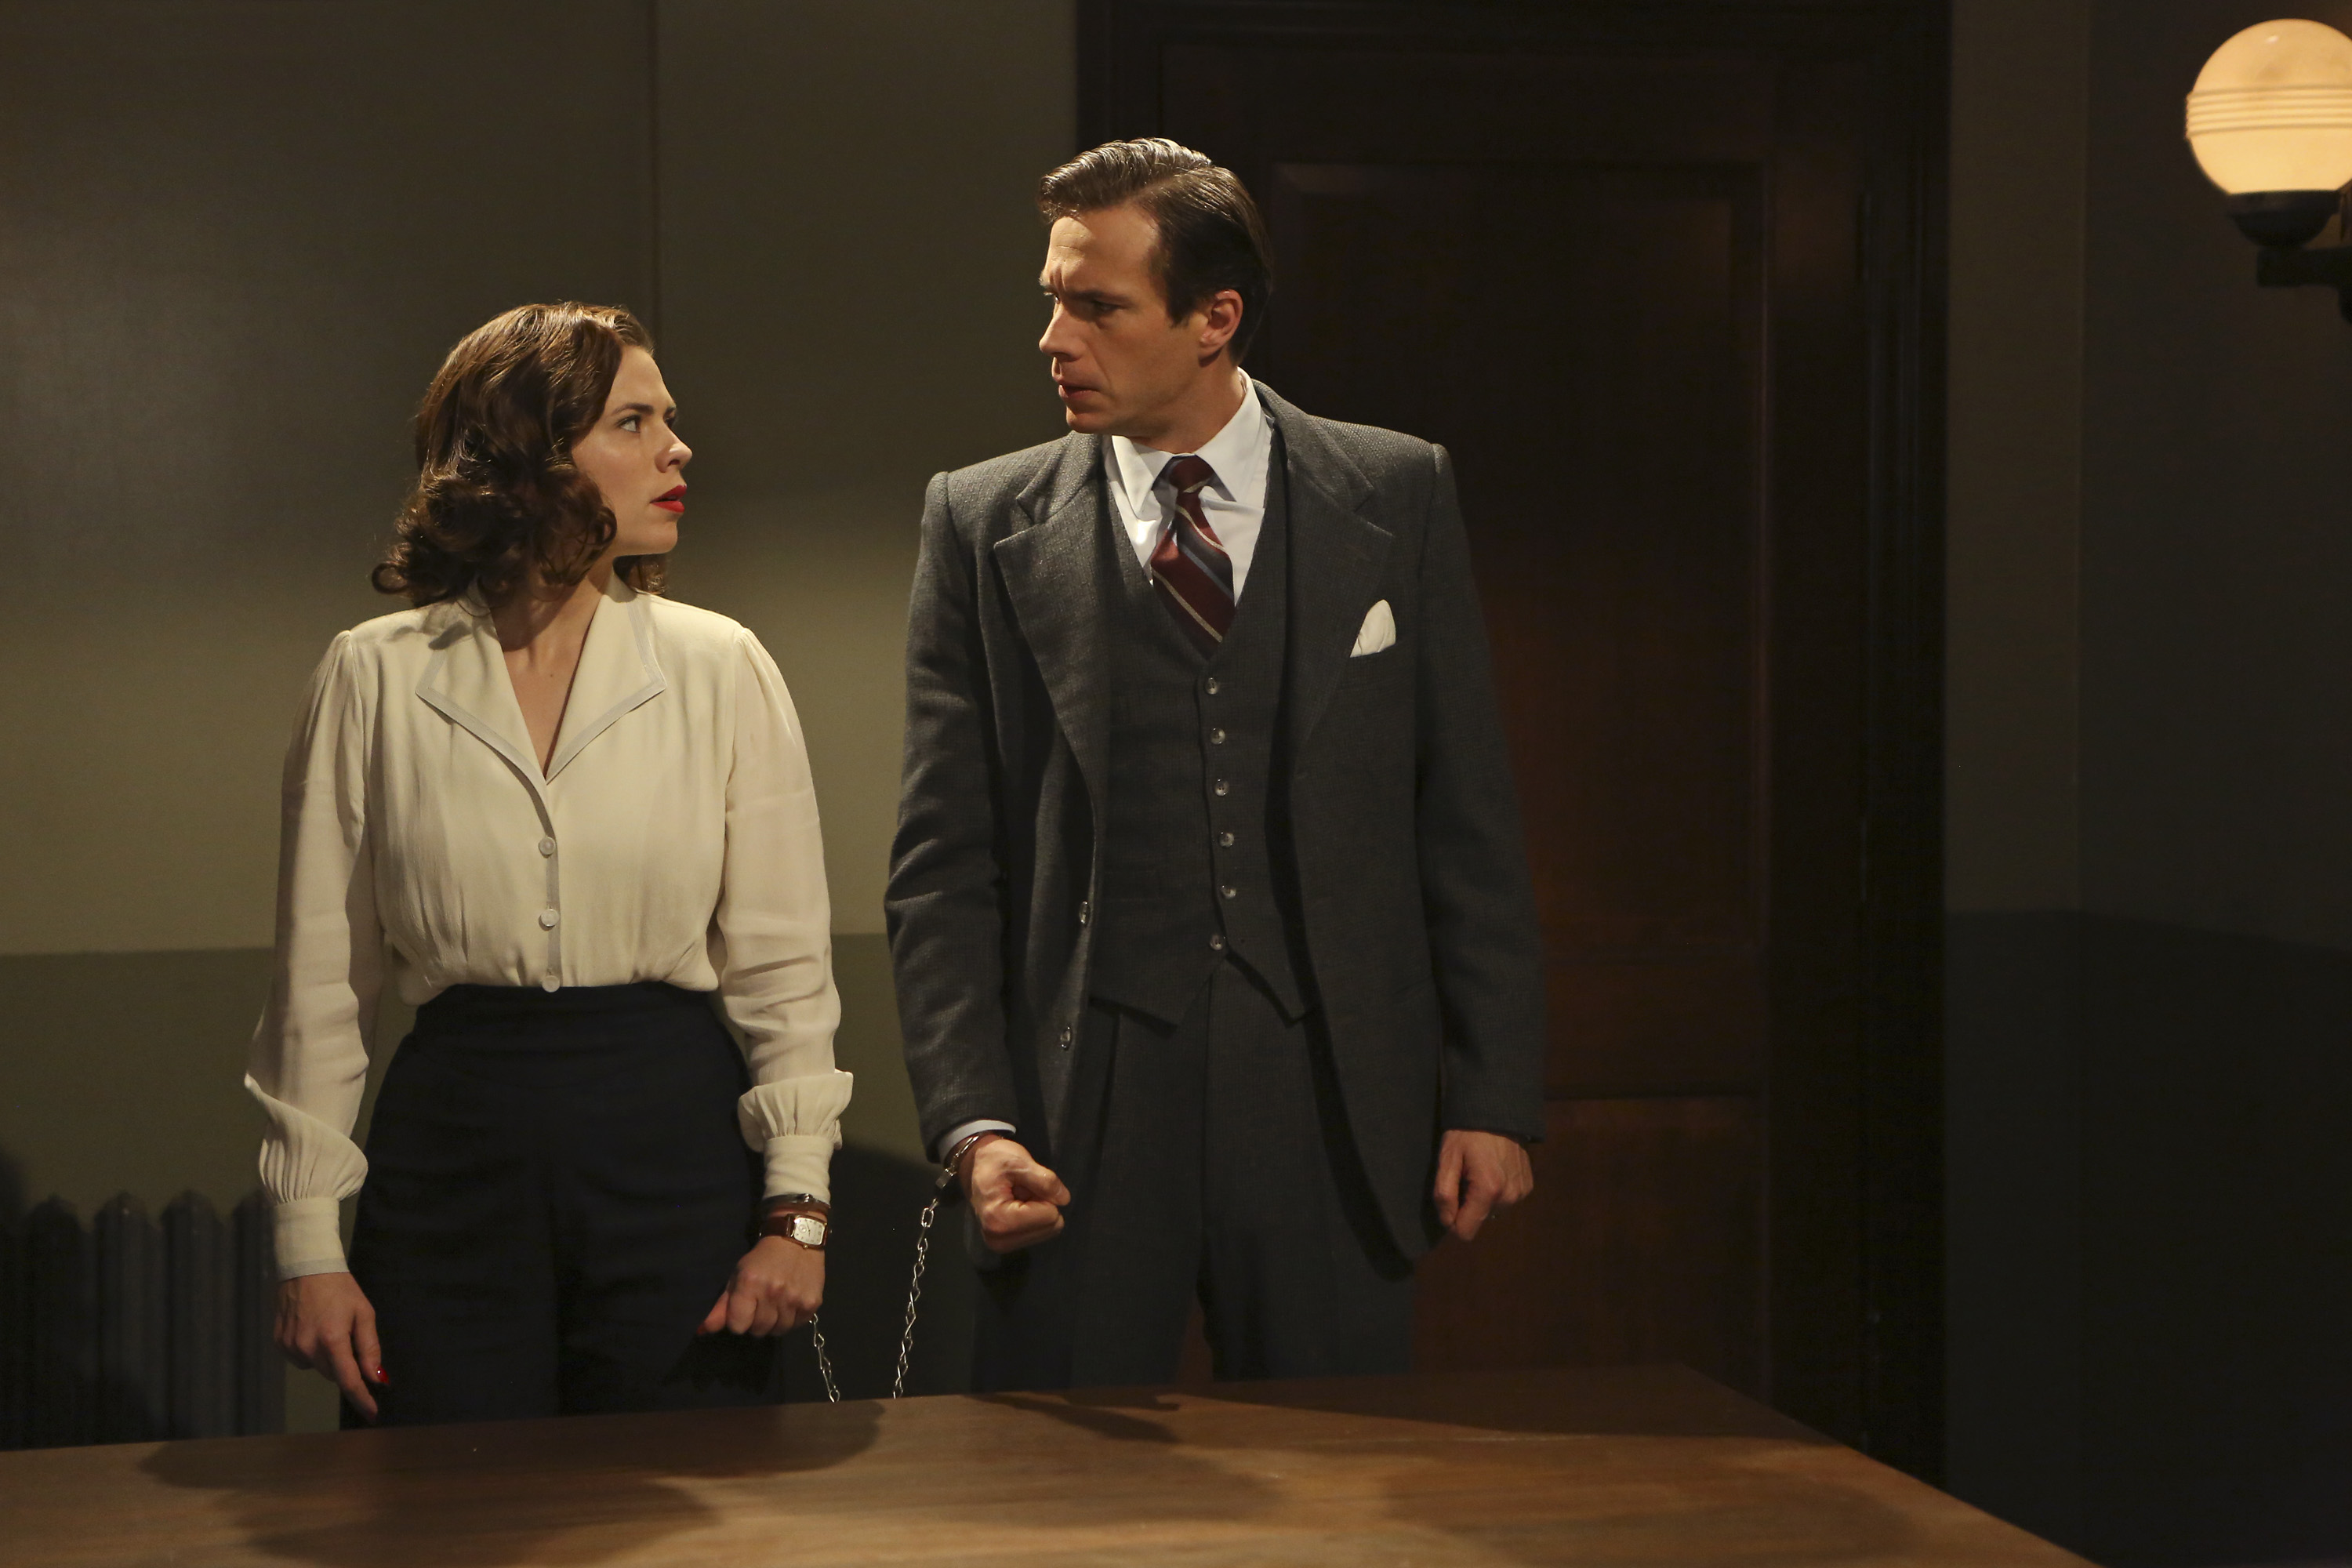 tv show, agent carter, edwin jarvis, hayley atwell, james d'arcy, peggy carter